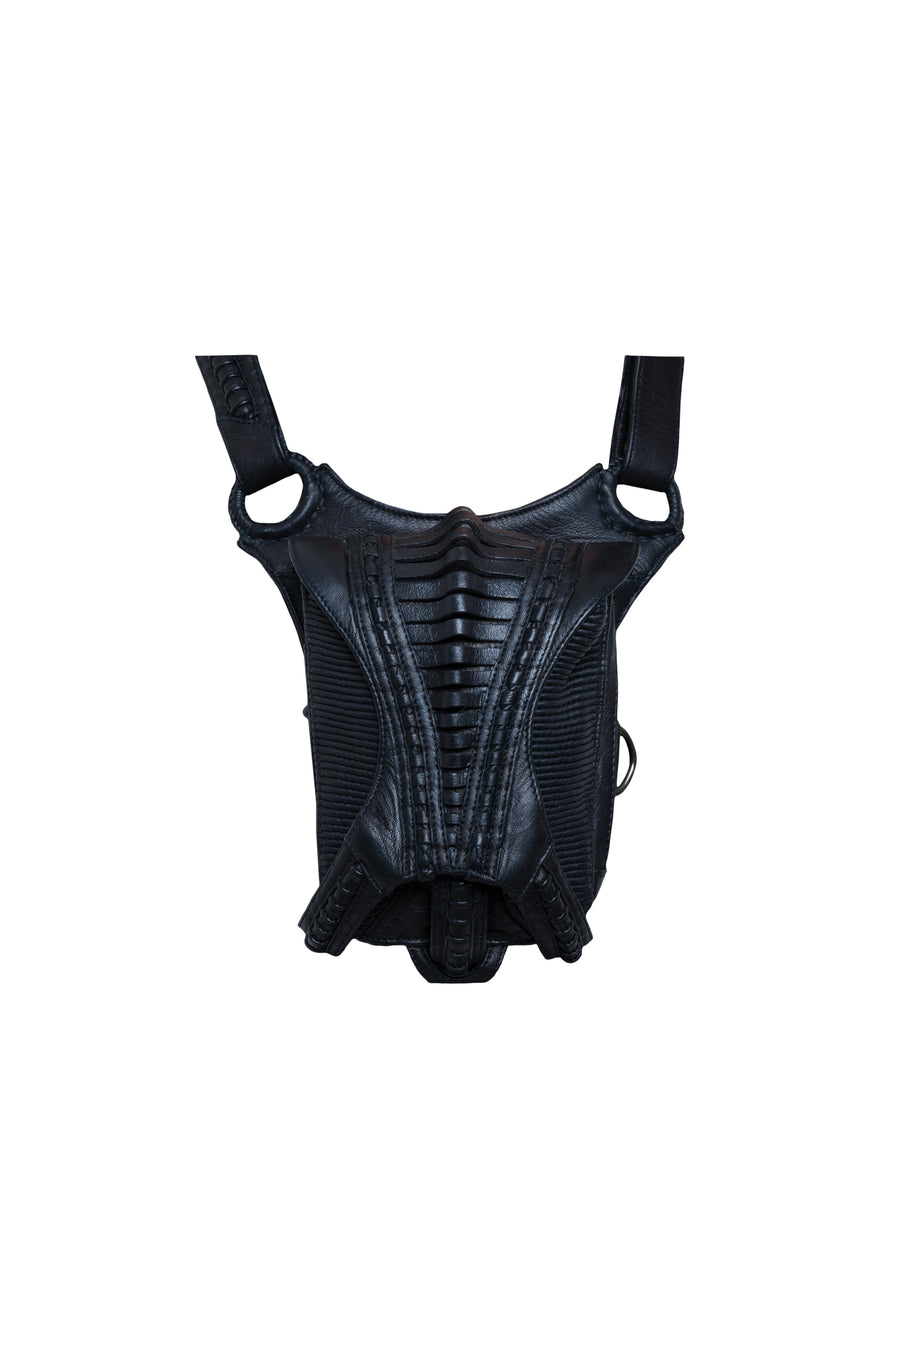 Avant-garde, biomorphic, exoskeleton pouch with sculptural leather construction and ribbed panels